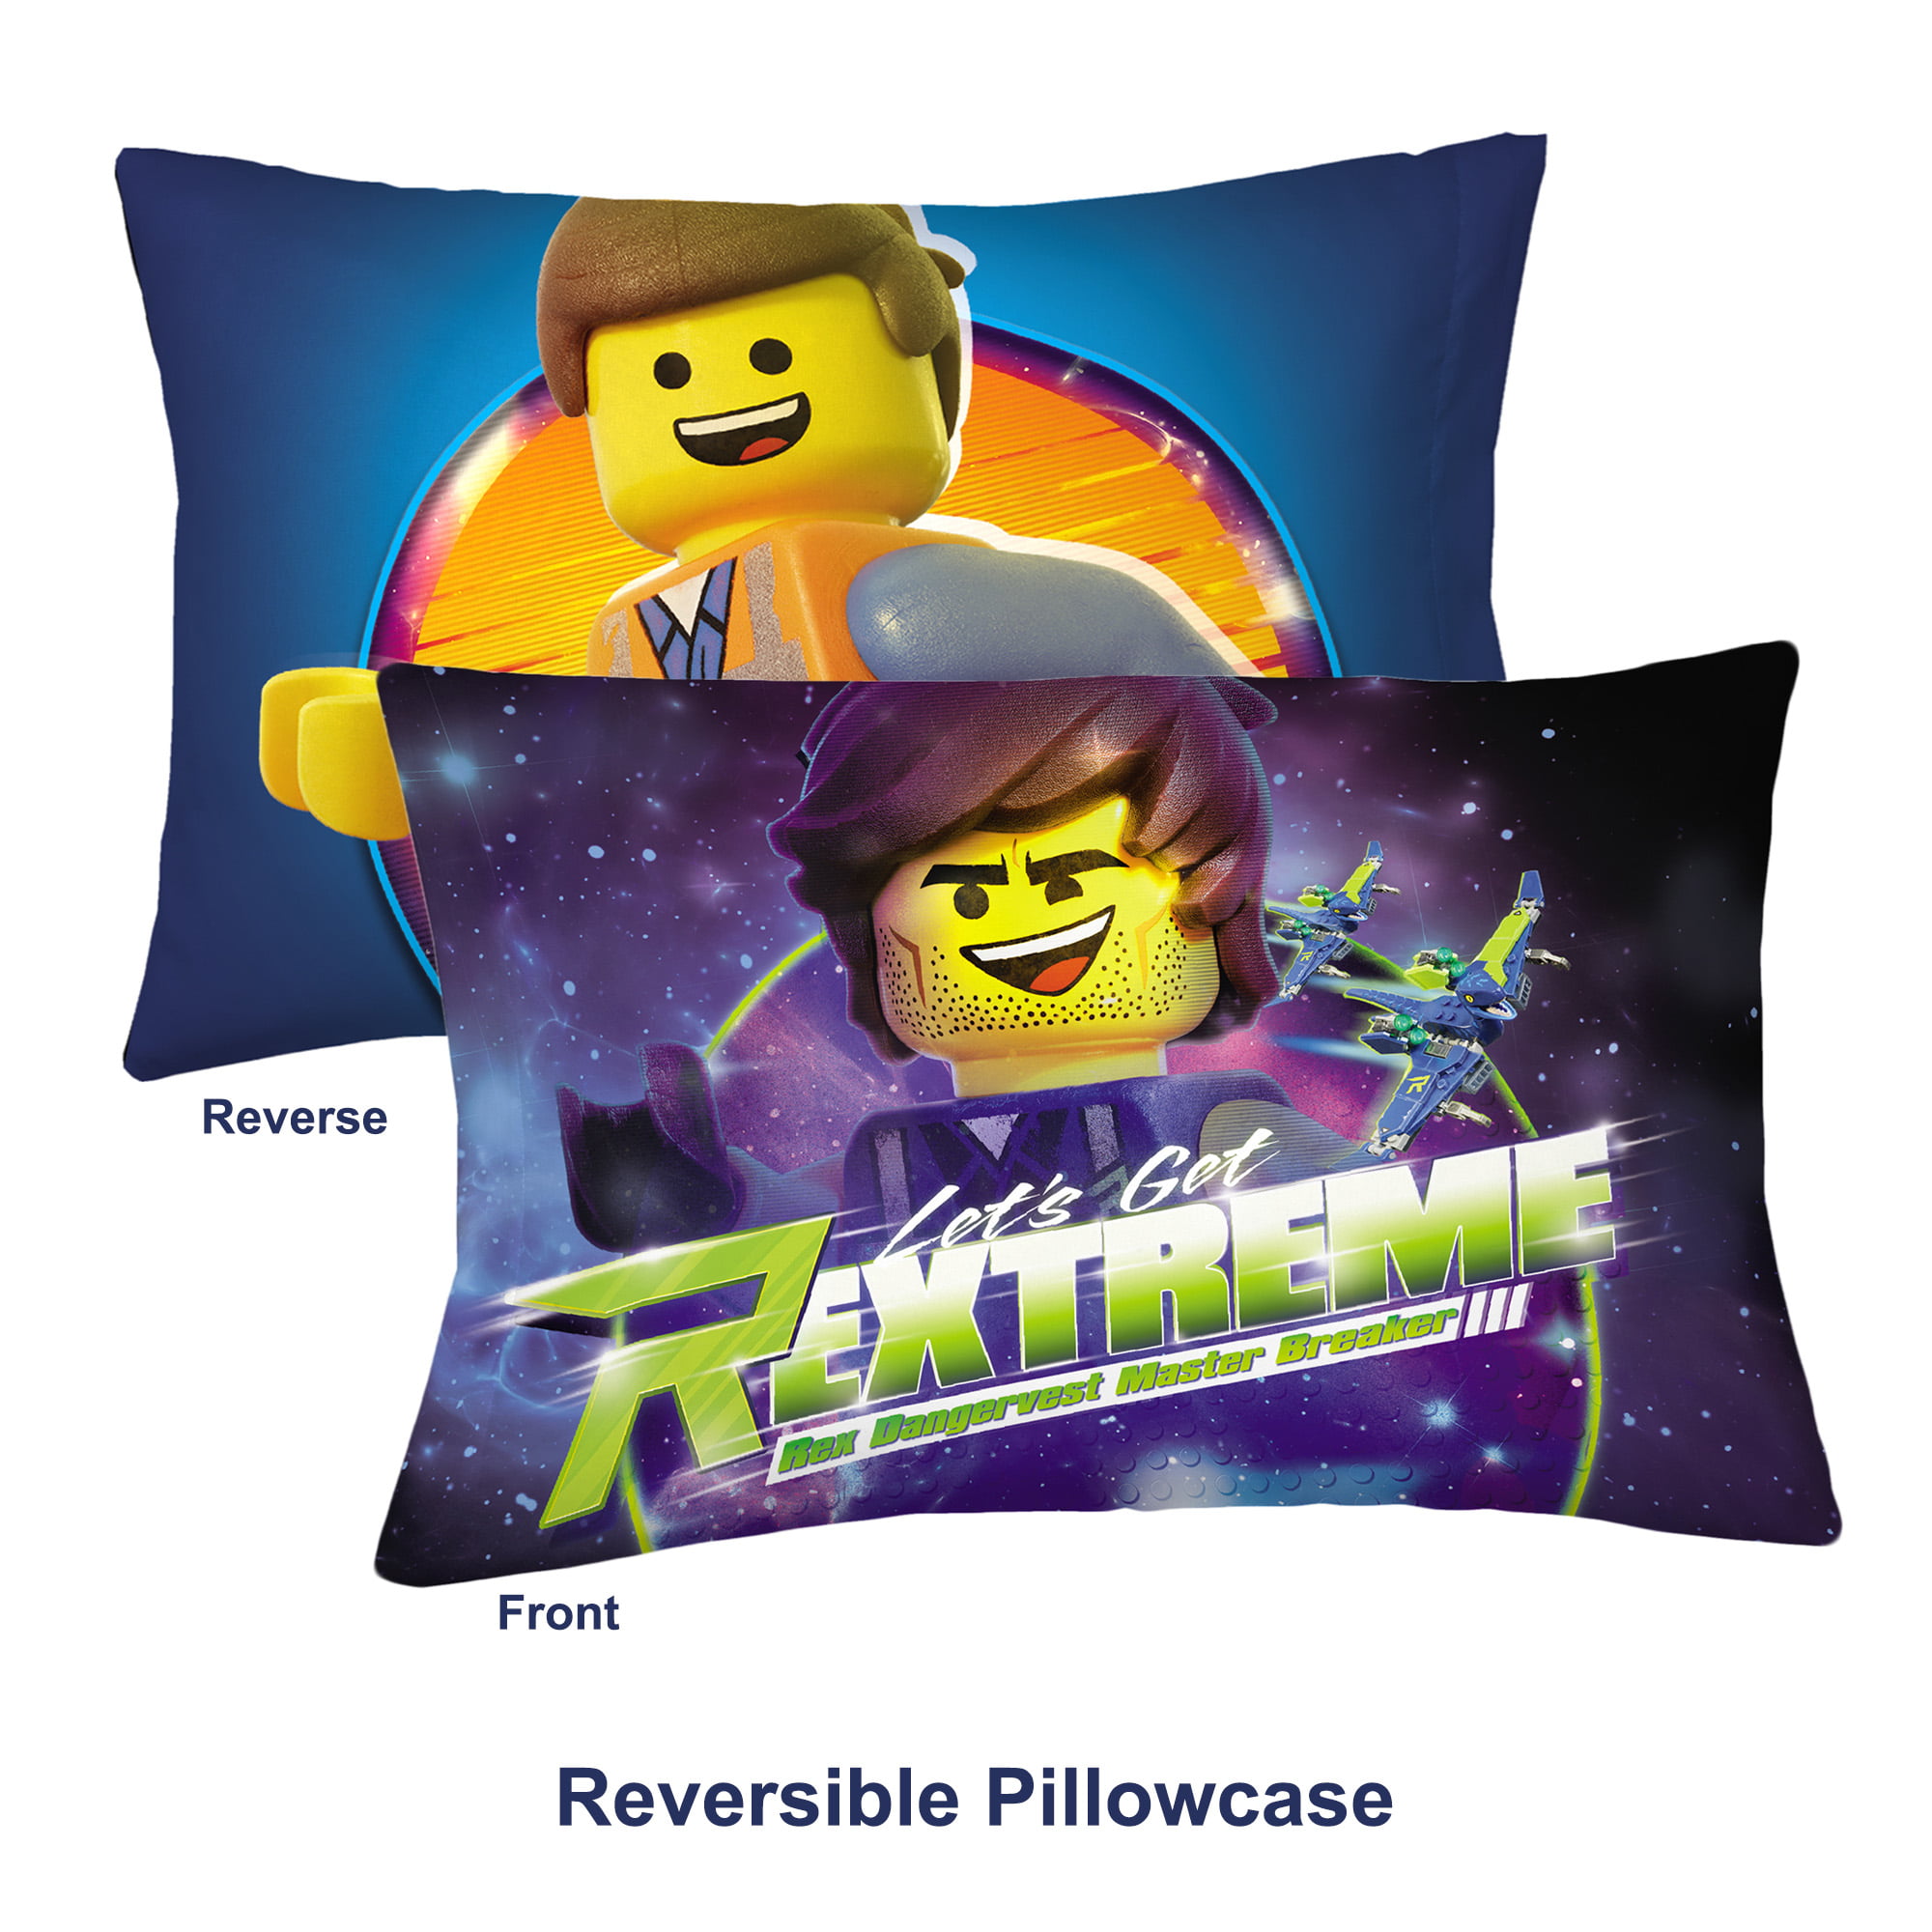 The LEGO Movie 2 Standard 1 Reversible Pillowcase 20"x30" Never Been Opened S2 